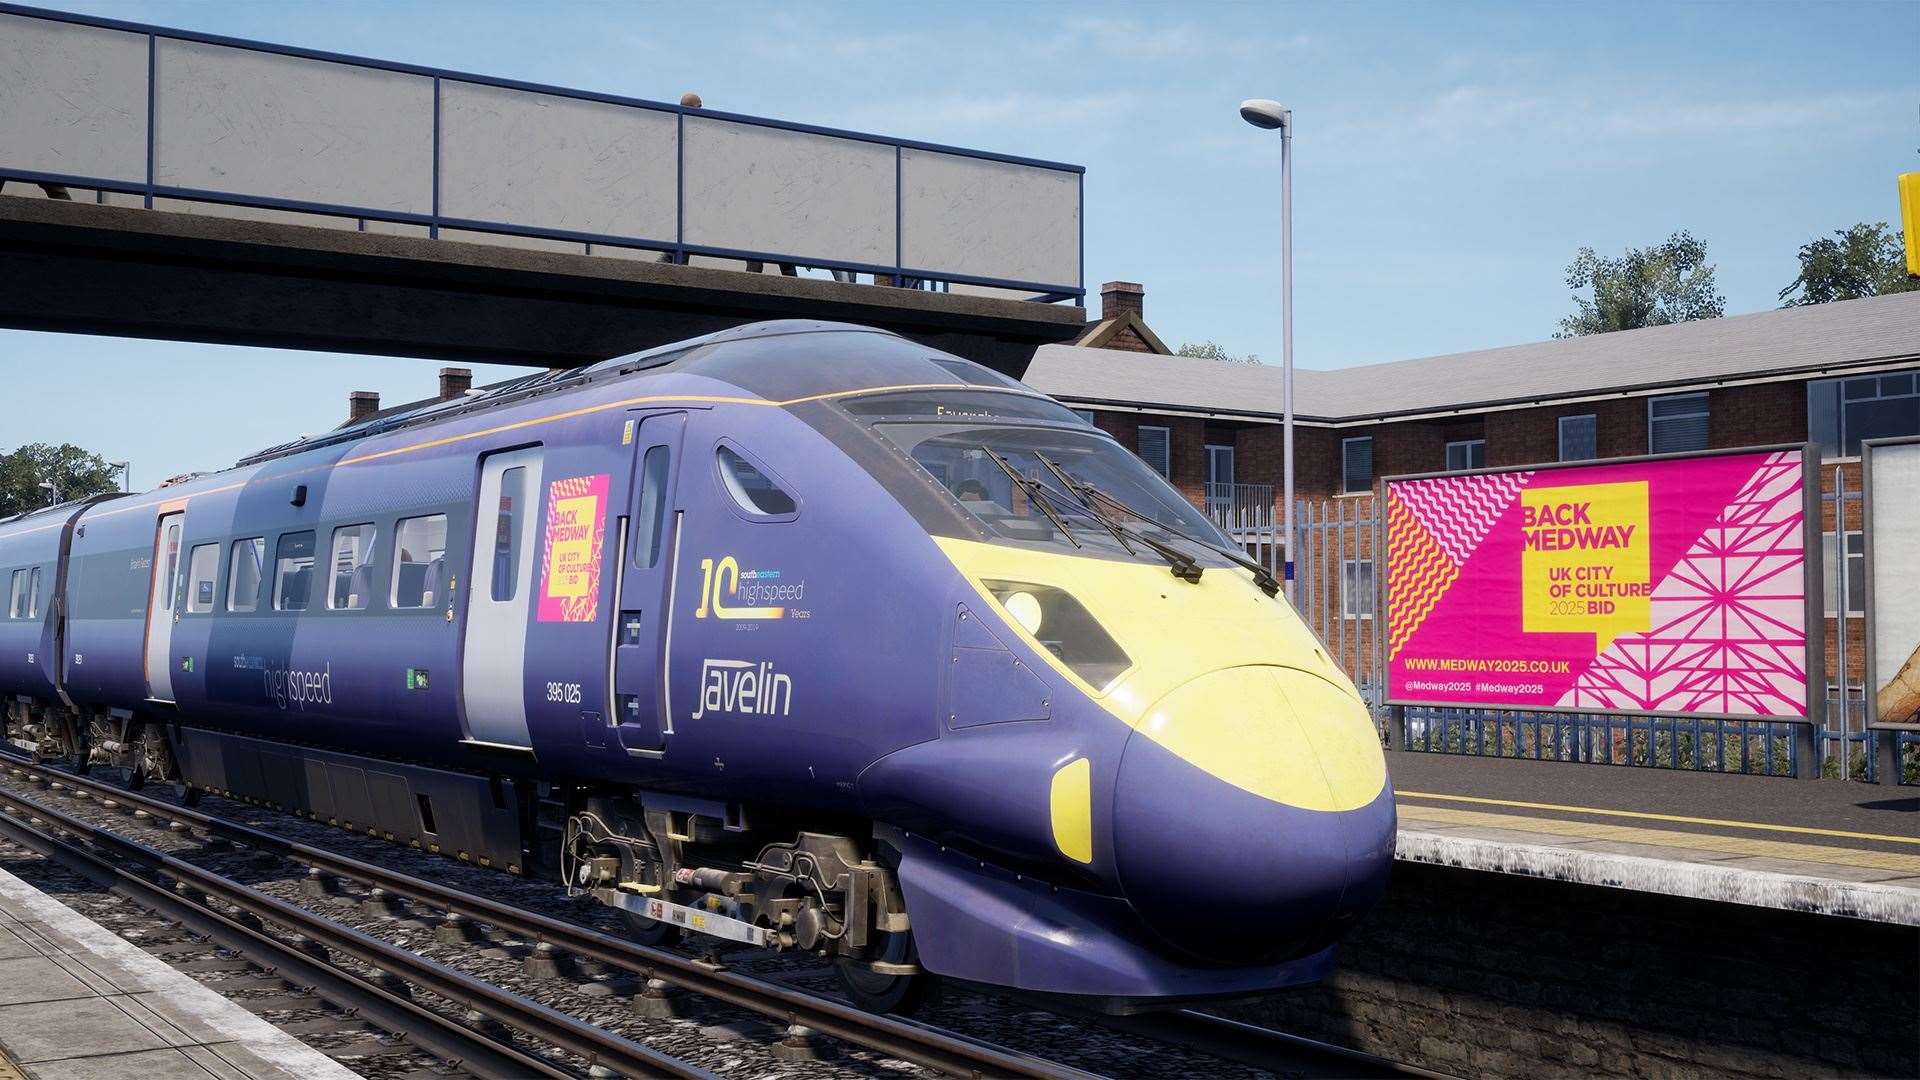 As reported earlier this year, Medway 2025 bid branding is to be included in Chatham-based Dovetail Games' Train Sim 2: Southeastern High Speed